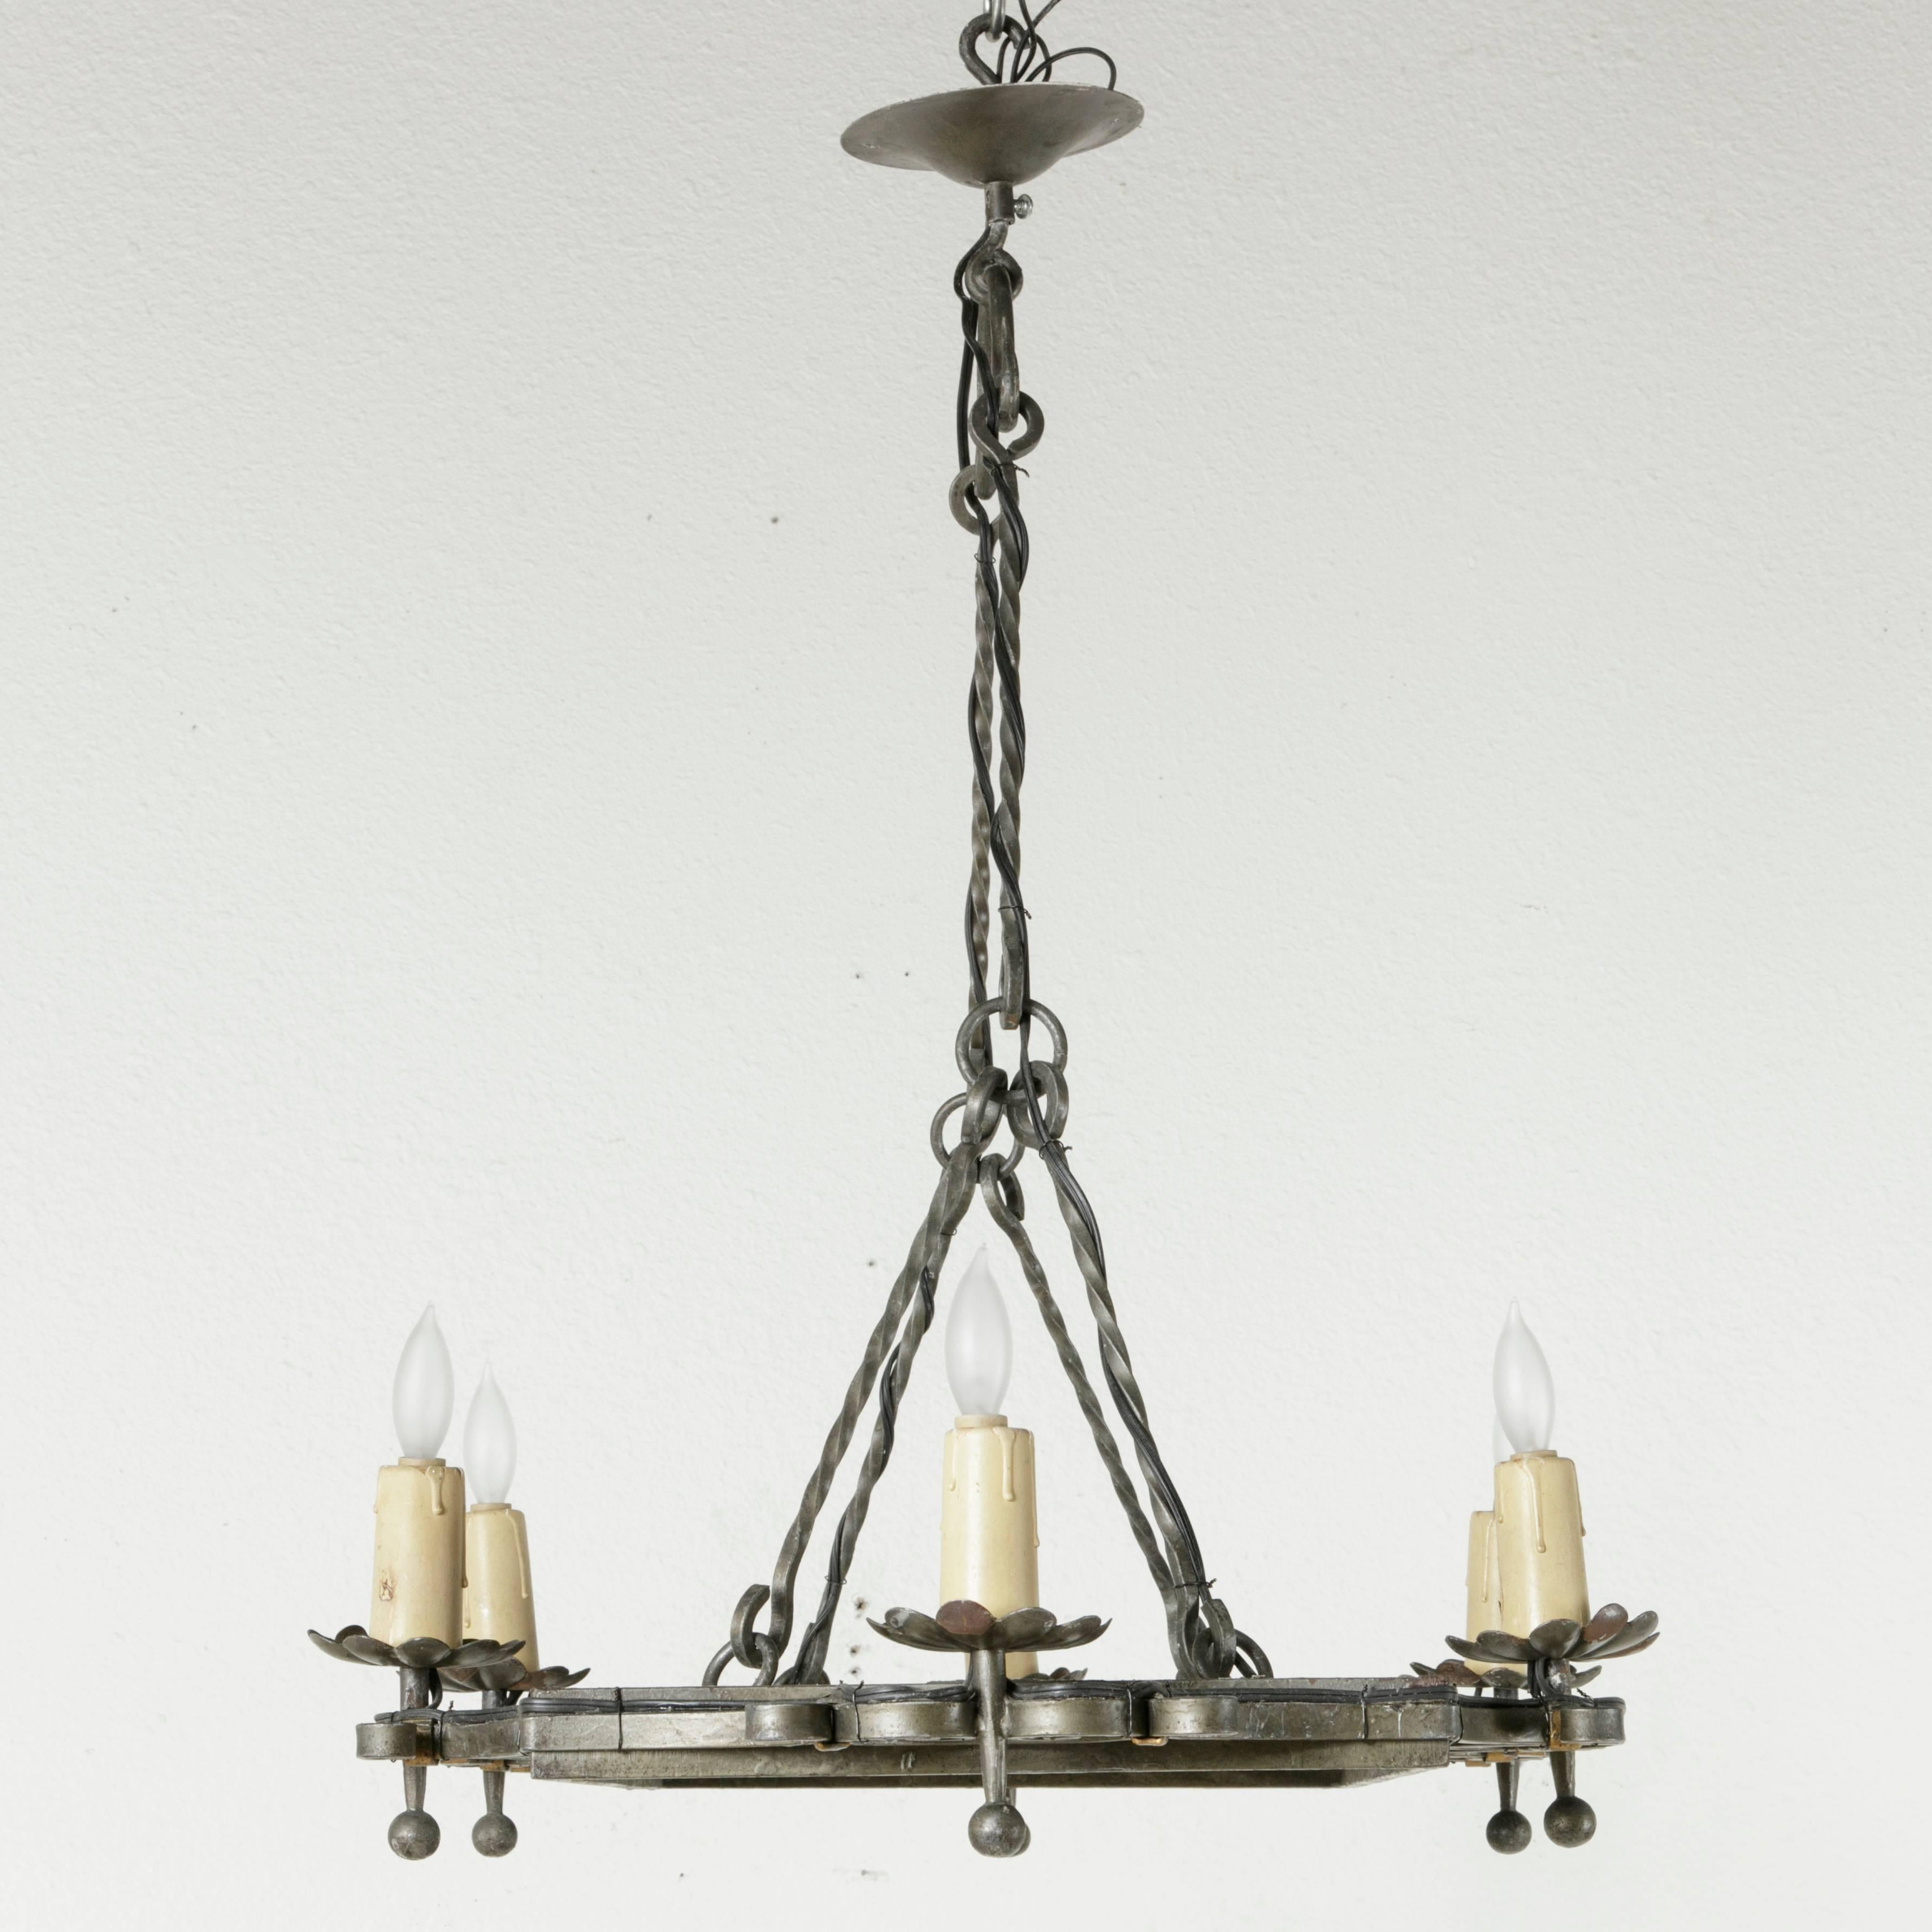 Berlin Iron Mid-20th Century French Hand-Forged Iron Chandelier or Pot Rack with Six Lights